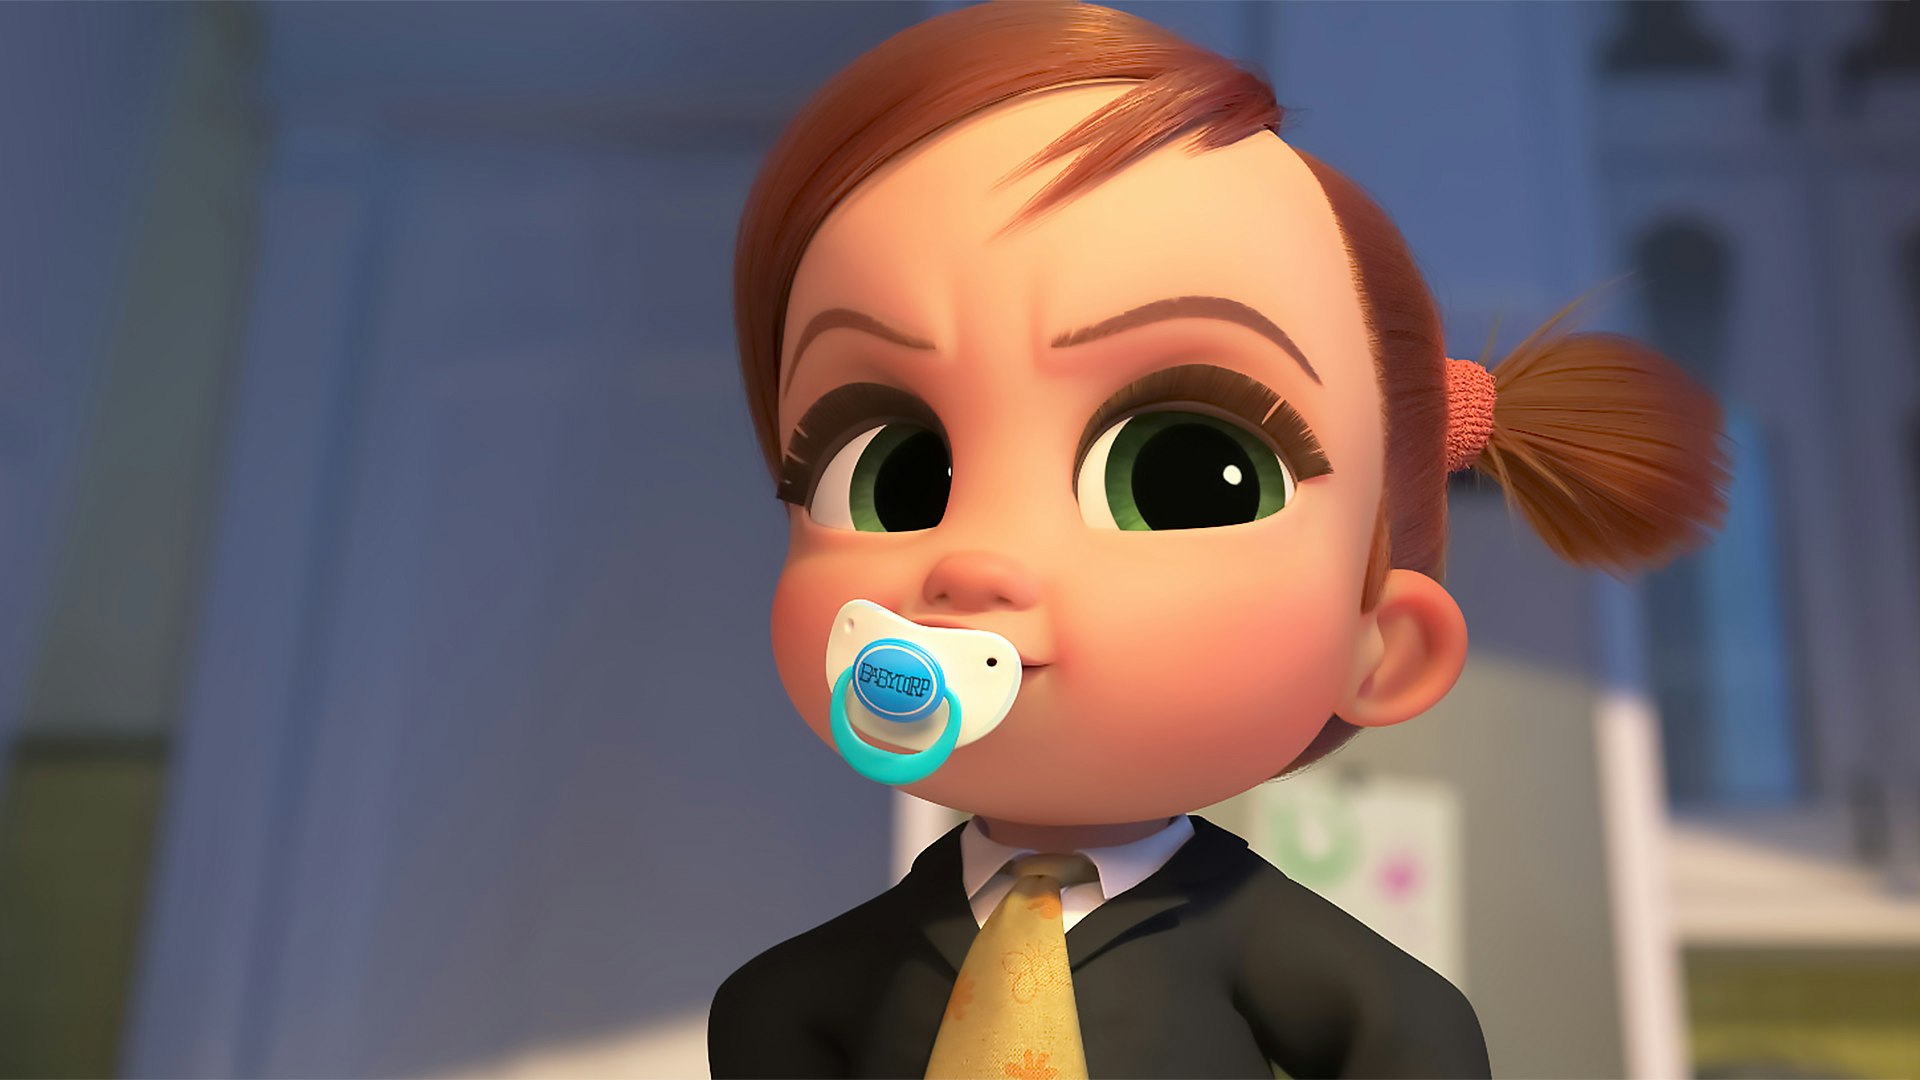 Watch The Boss Baby: Family Business Online with NEON